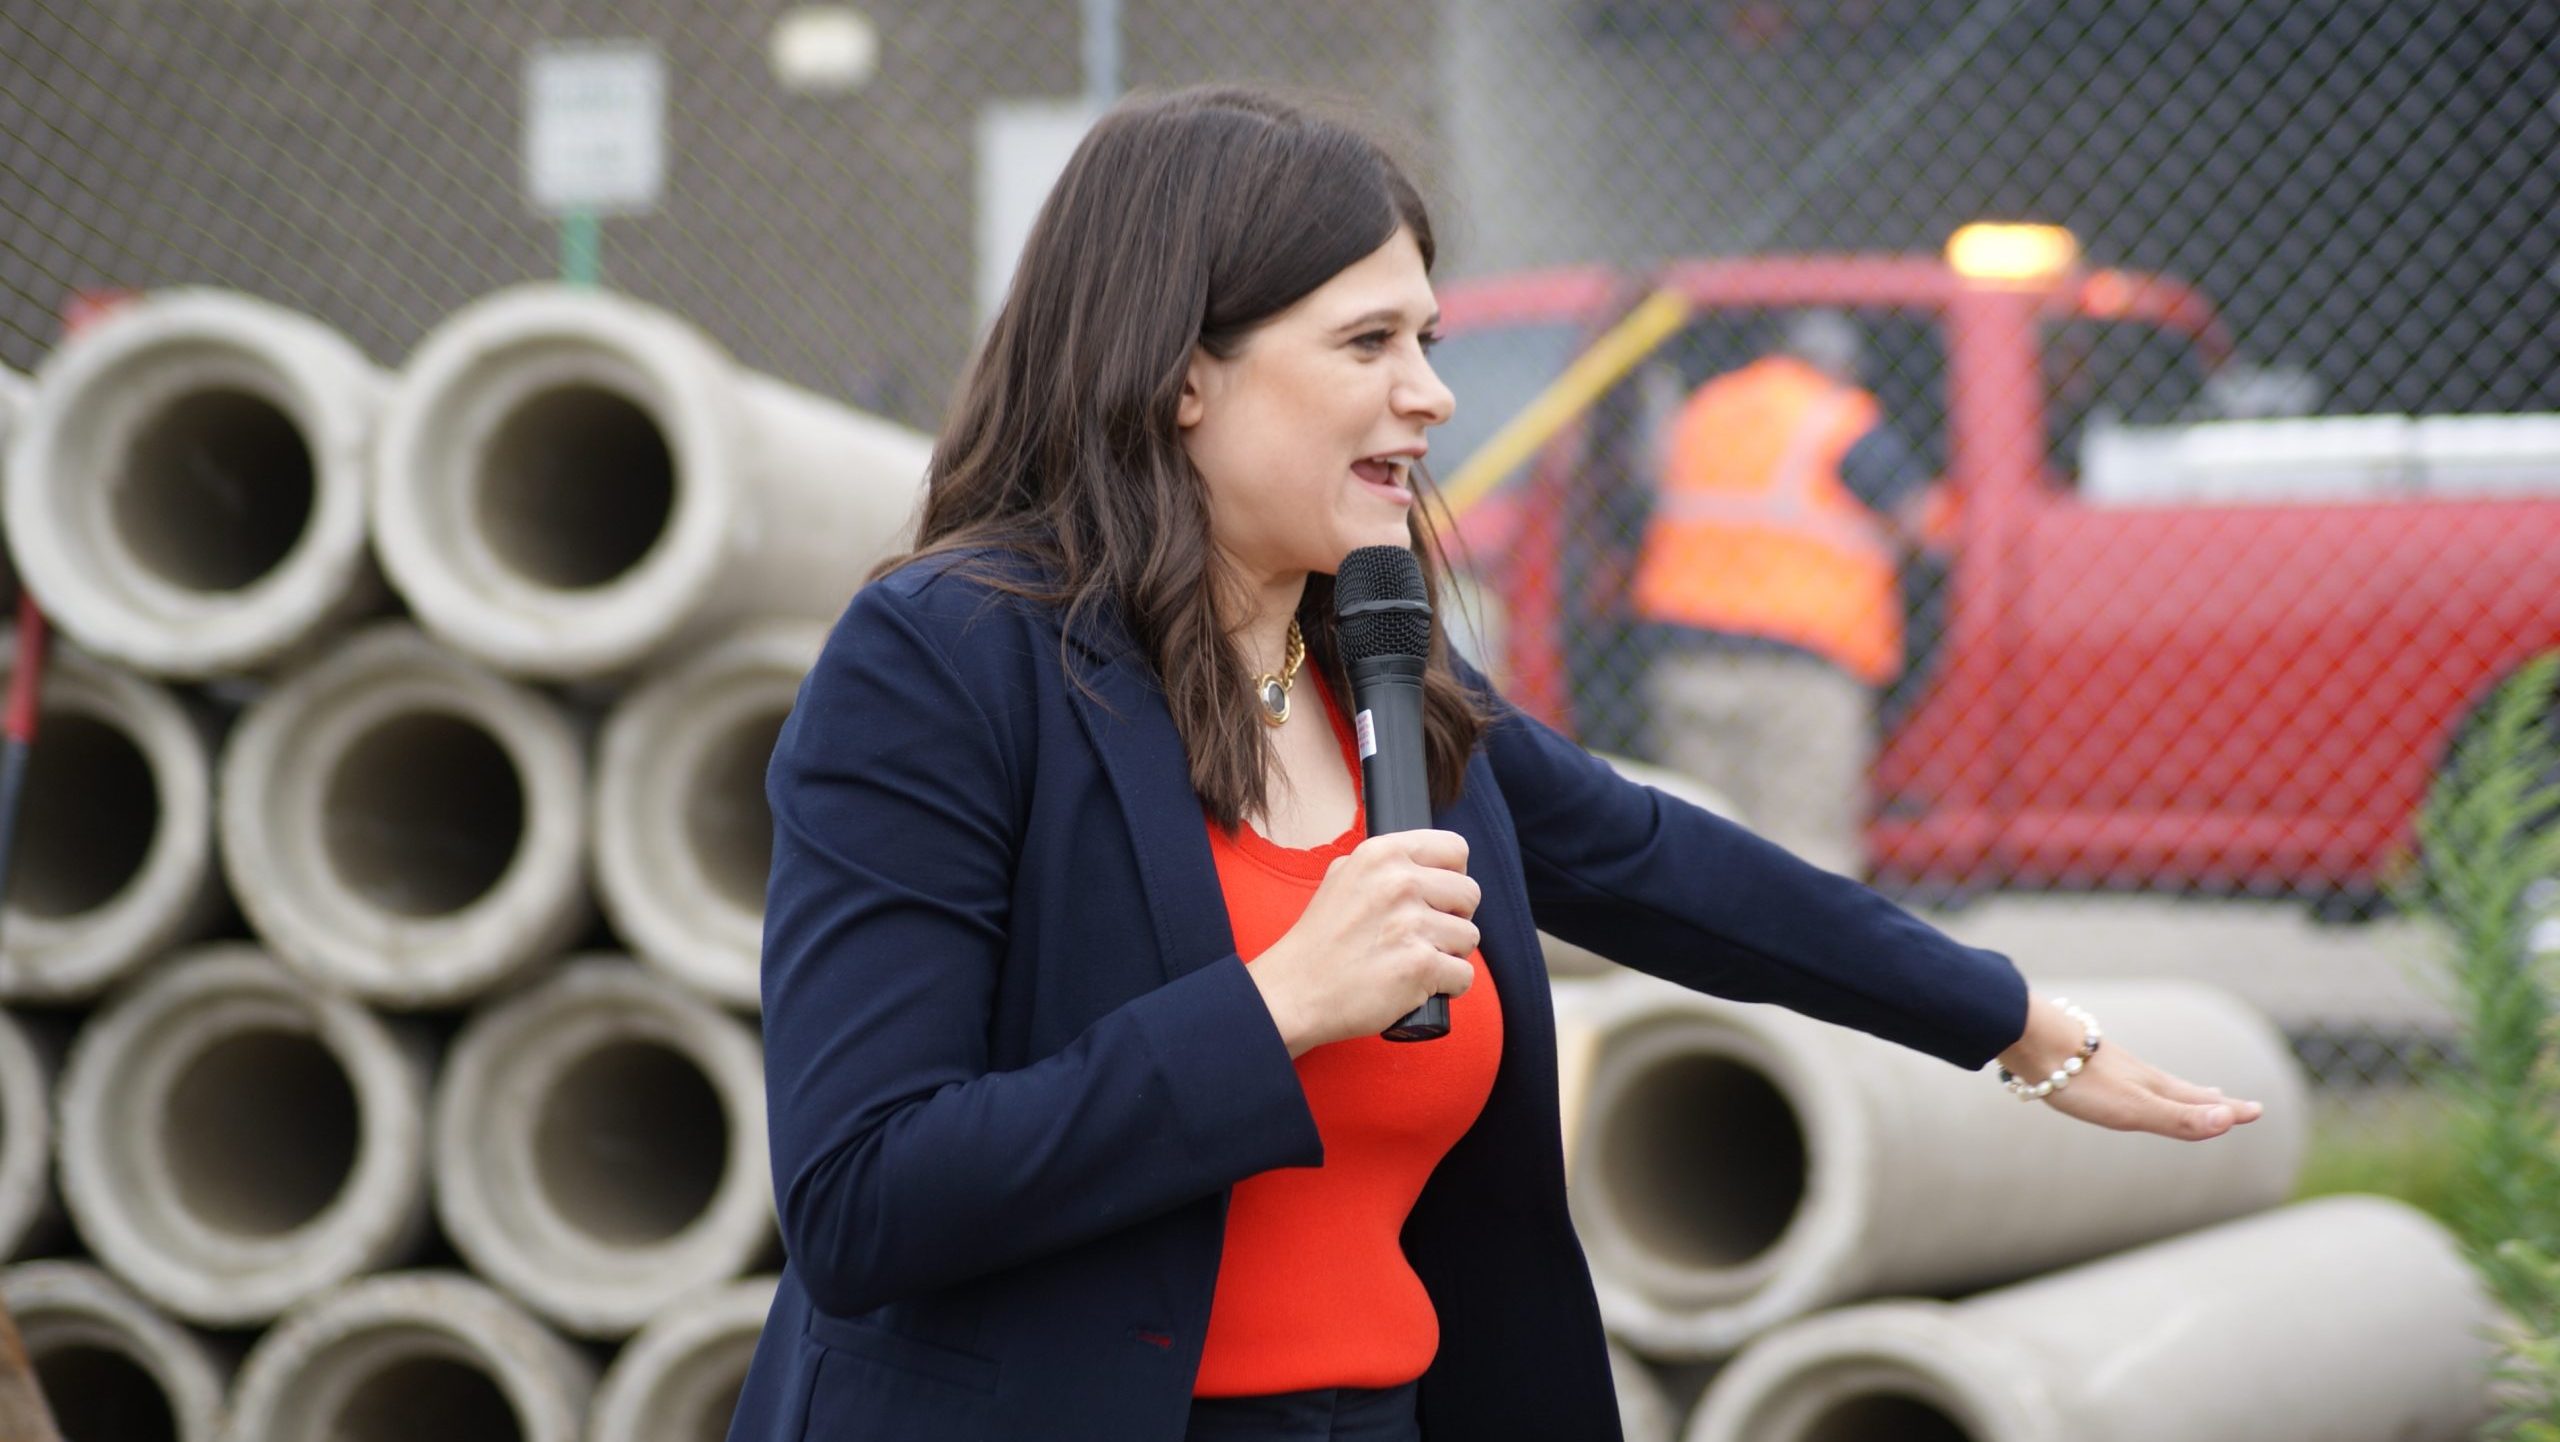 U.S. Rep. Haley Stevens speaks at a groundbreaking ceremony for an affordable housing project in Ferndale, Mich. on Aug. 23, 2023.